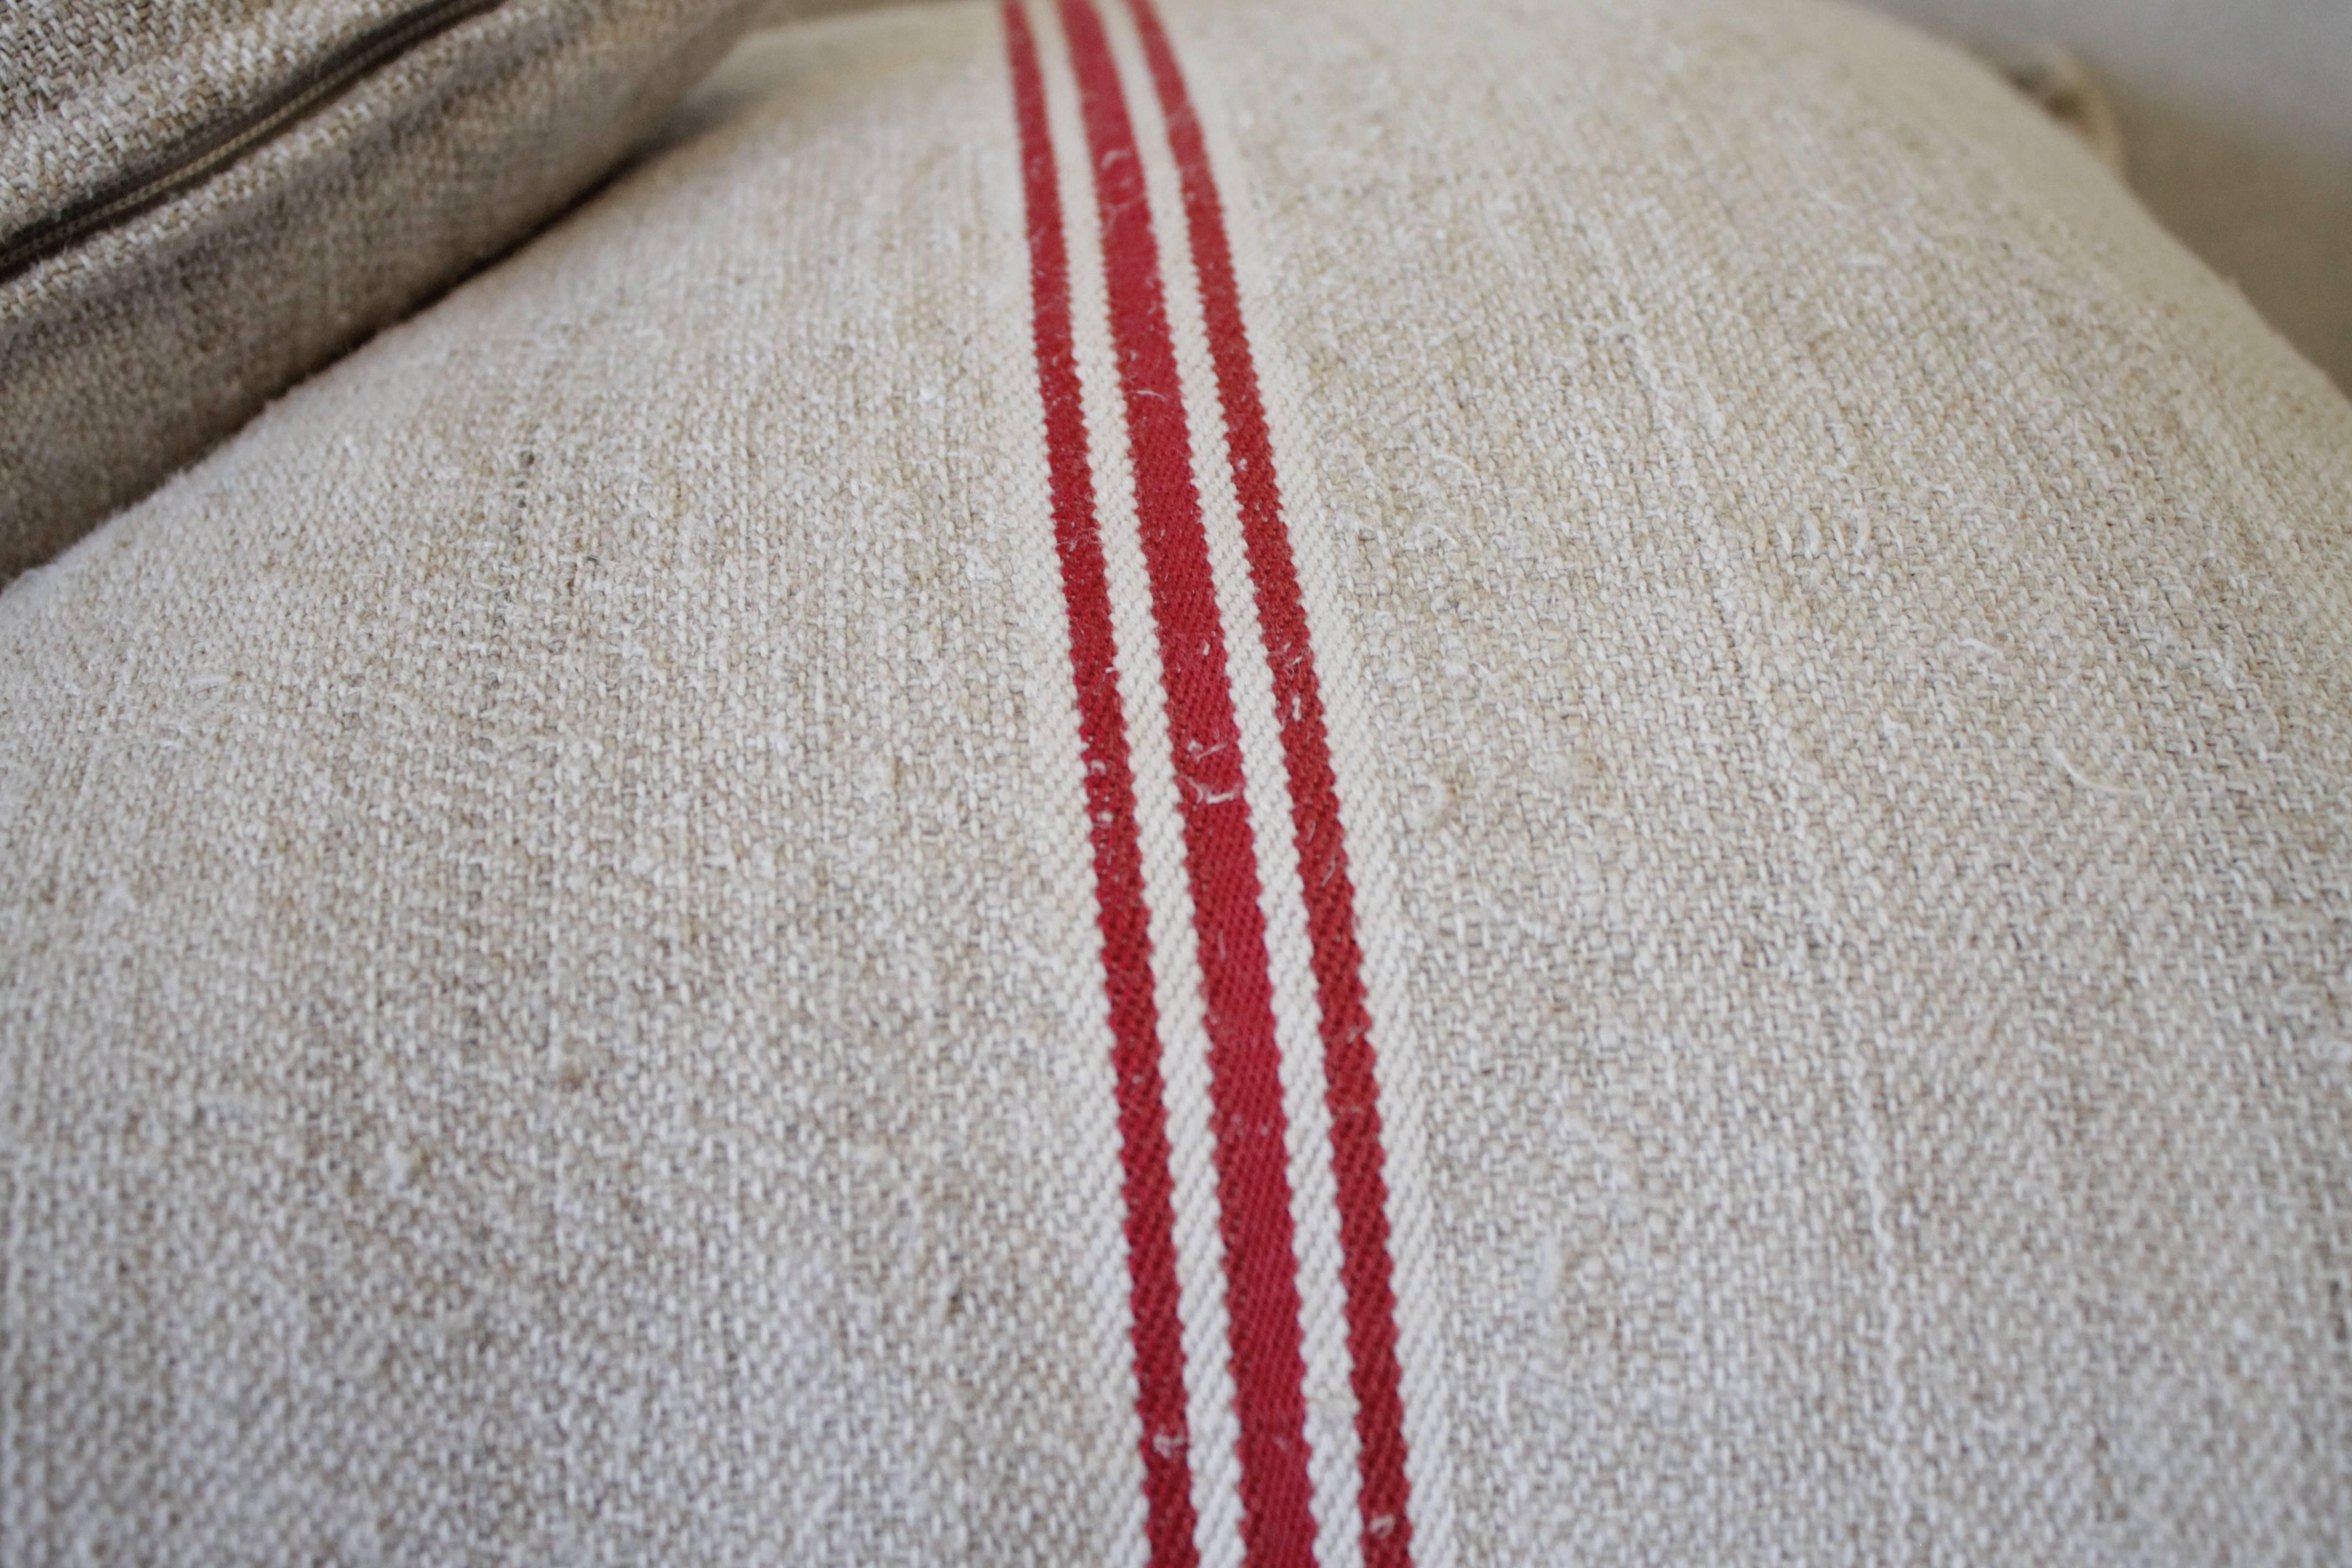 We make these pillows from old grain sacks from Eastern Europe. The pair have a deep red triple stripe down the center, and the body is a medium oatmeal color. They are sewn with a zipper closure, and since we prewash all our vintage fabrics in a